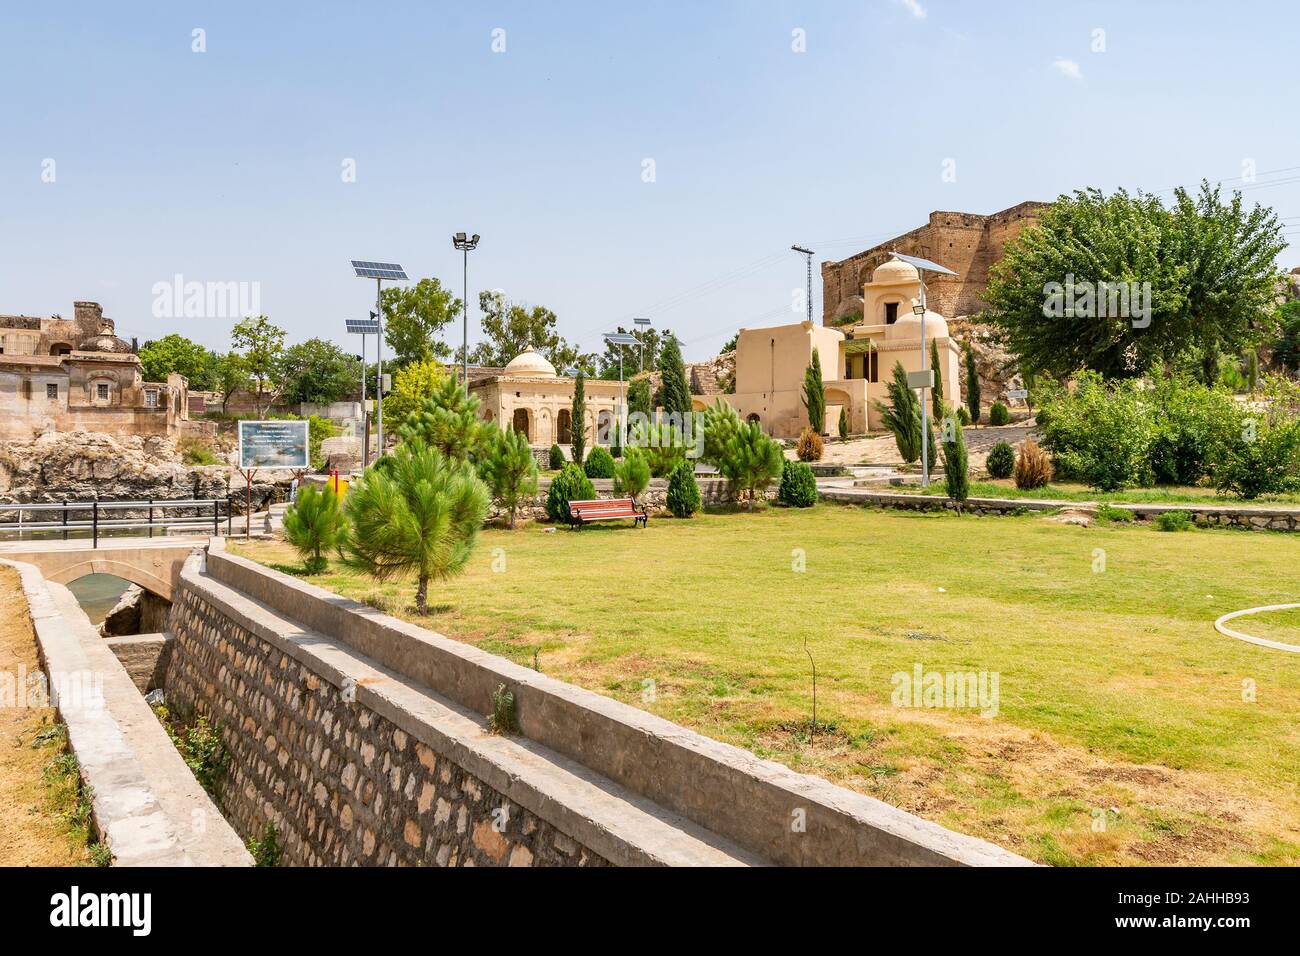 Chakwal Qila Katas Raj Hindu Temples Dedicated to Shiva Picturesque View of a Canal on a Sunny Blue Sky Day Stock Photo